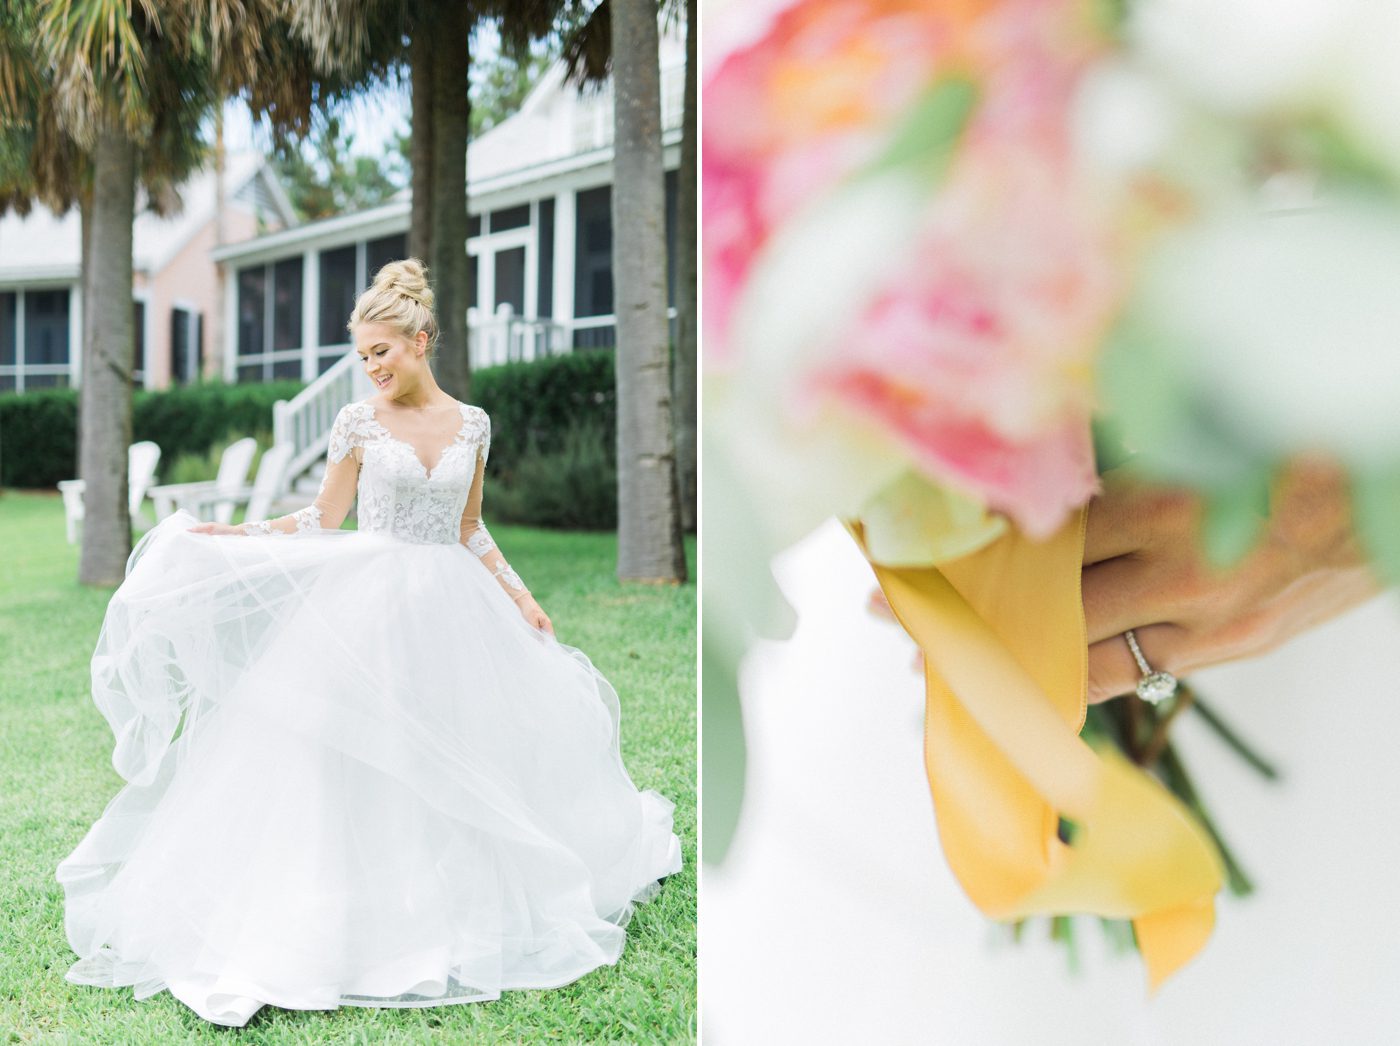 Gorgeous Charleston bridal portrait in Hayley Paige gown with lace sleeves and lush bouquet. Photo by Catherine Ann Photography